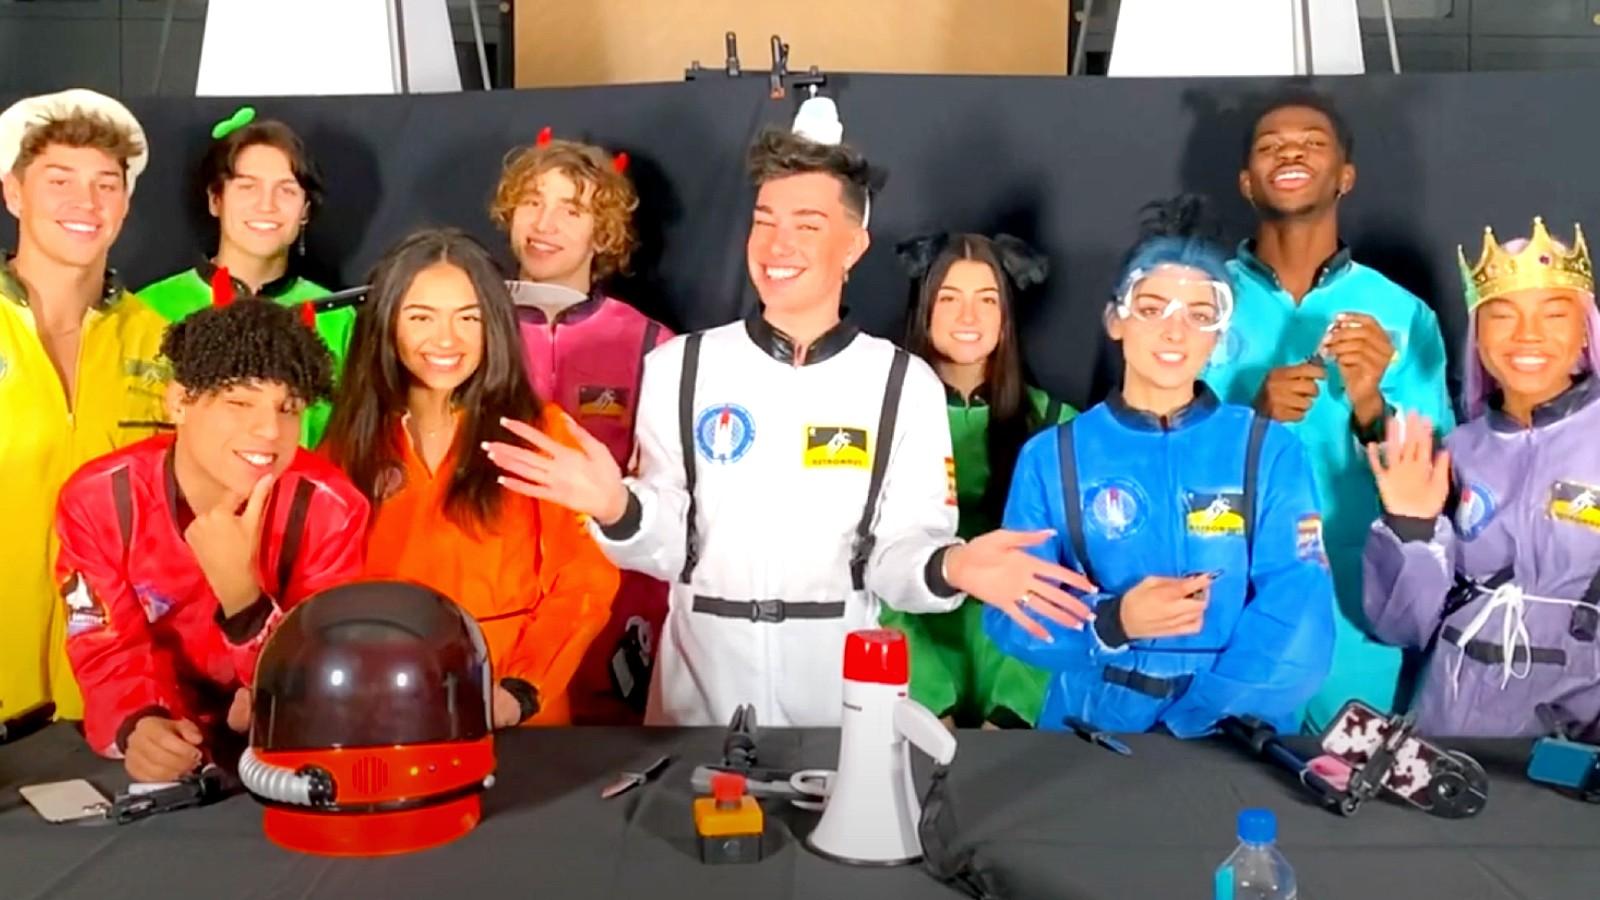 James Charles poses with other social media stars in Among Us inspired costumes